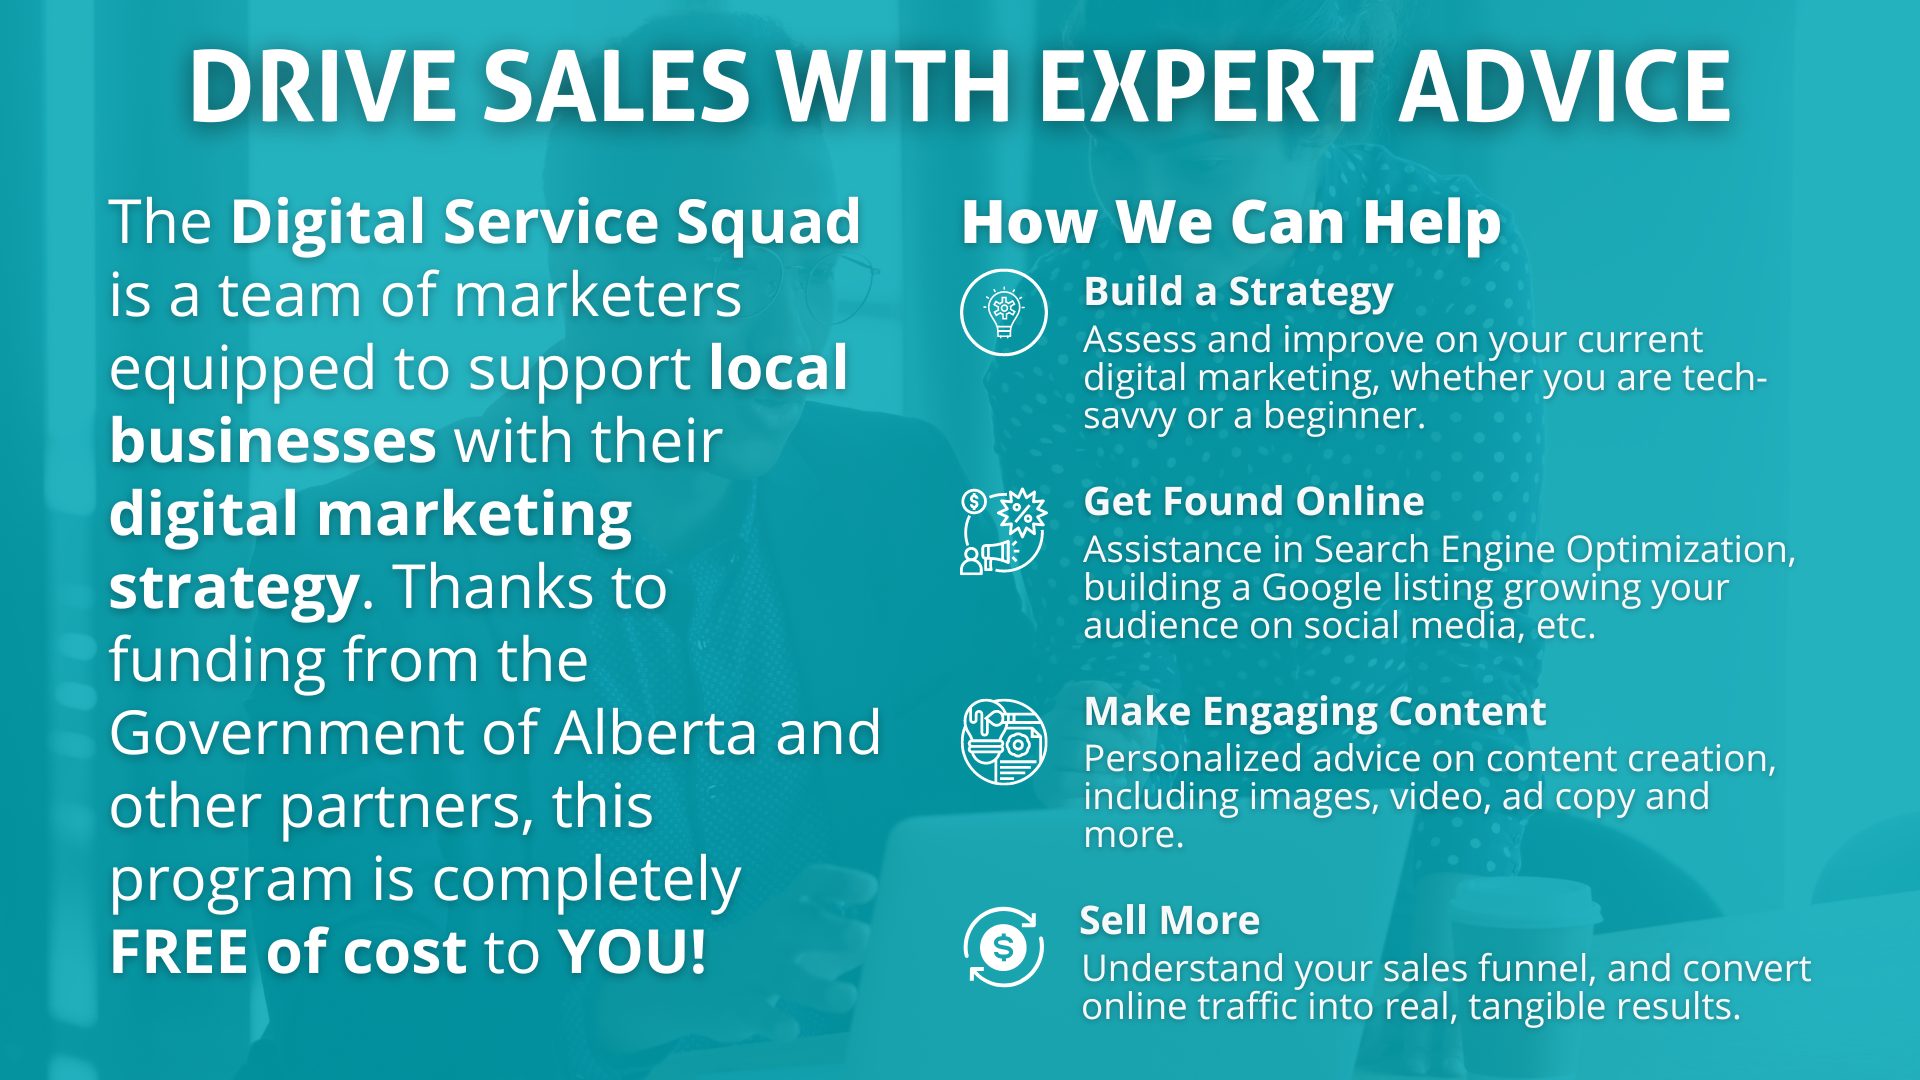 Increase traffic and sales with the Digital Service Squad